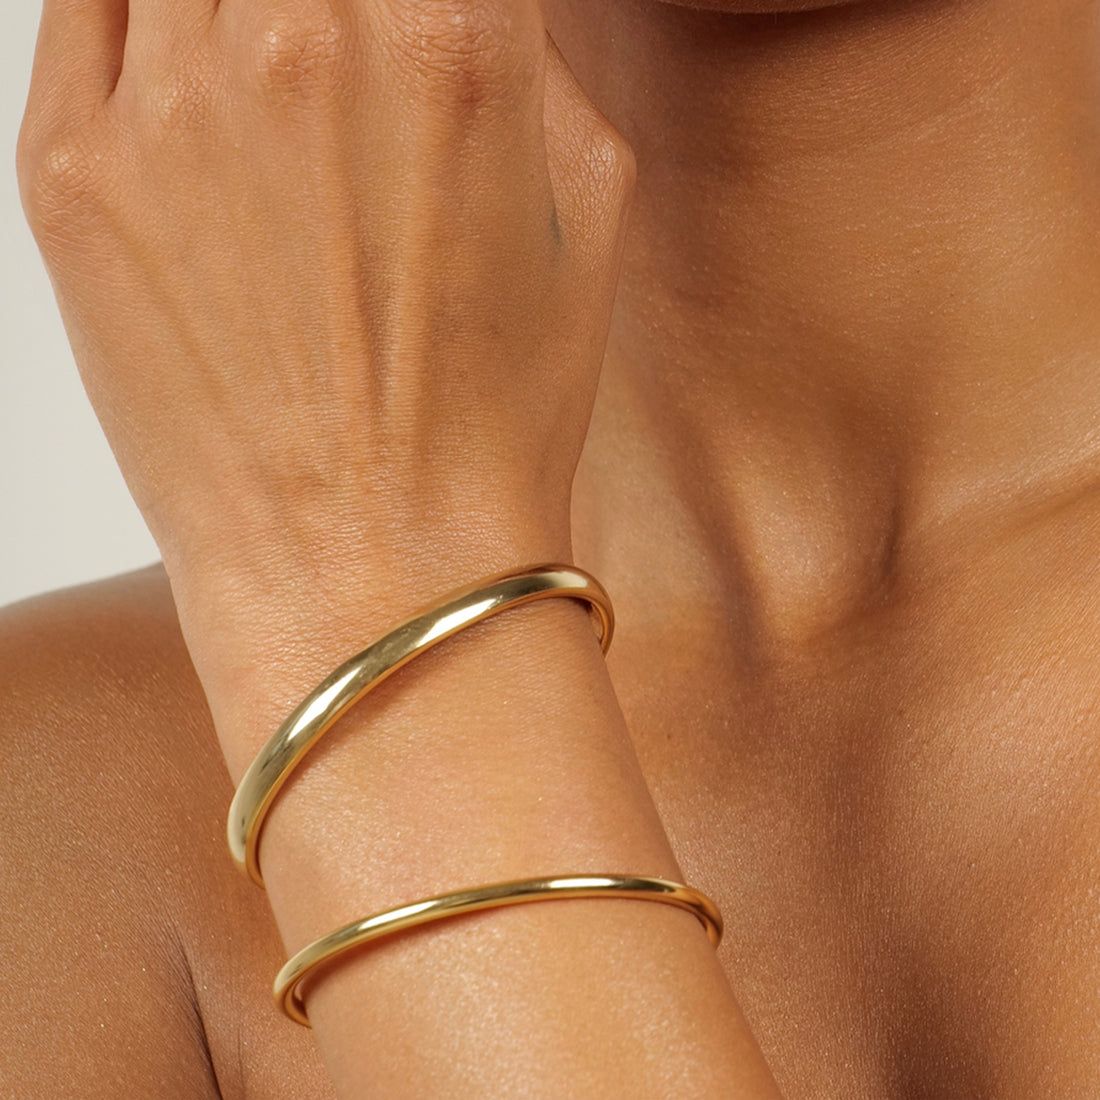 Enhance your personality by wearing gold bangles